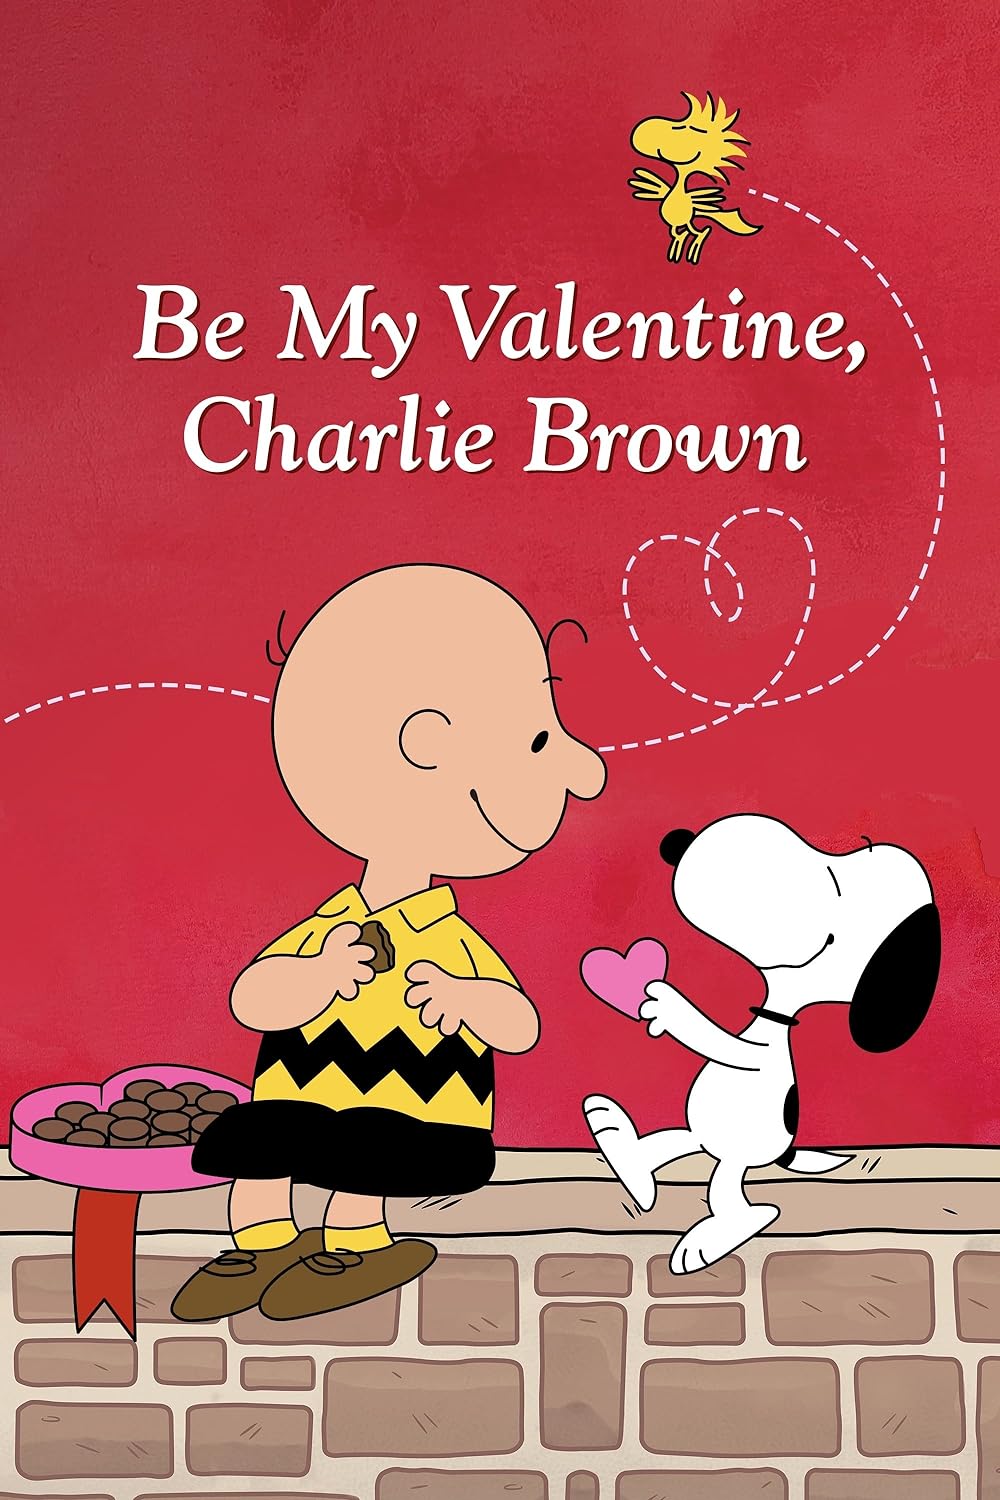 In this Peanuts short from 1975, Charlie Brown and friends prepare for what they hope to be the best Valentine's Day ever. Charlie, ever the lovable blockhead, yearns to receive at least one valentine. For a classic and heartwarming celebration, this short film is a delightful choice.